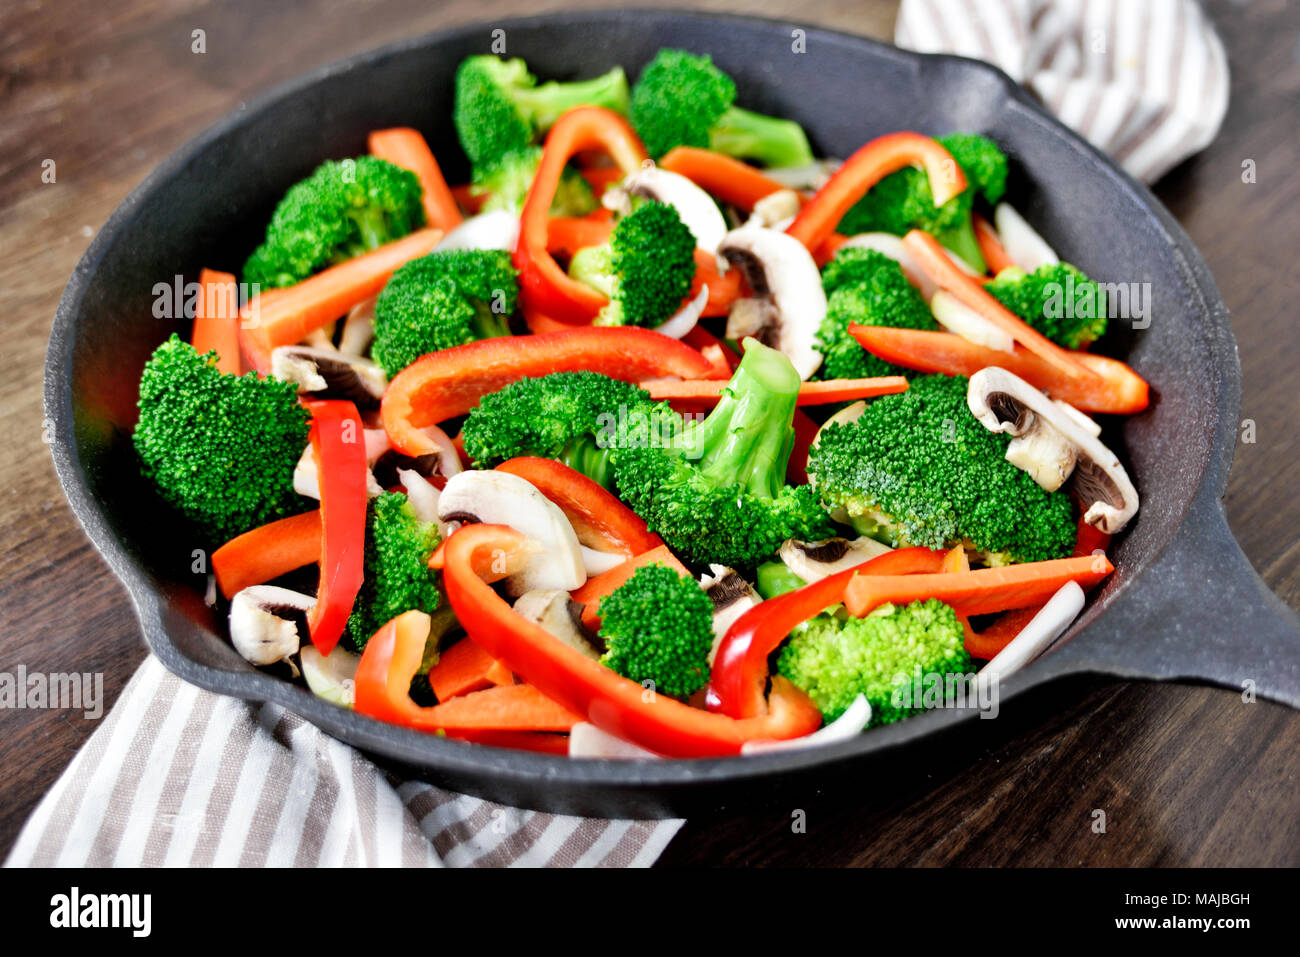 Healthy eating scene with vegetables in an iron pan or cooking pan. Broccoli, red bell pepper, carrots and white mushrooms. Stock Photo